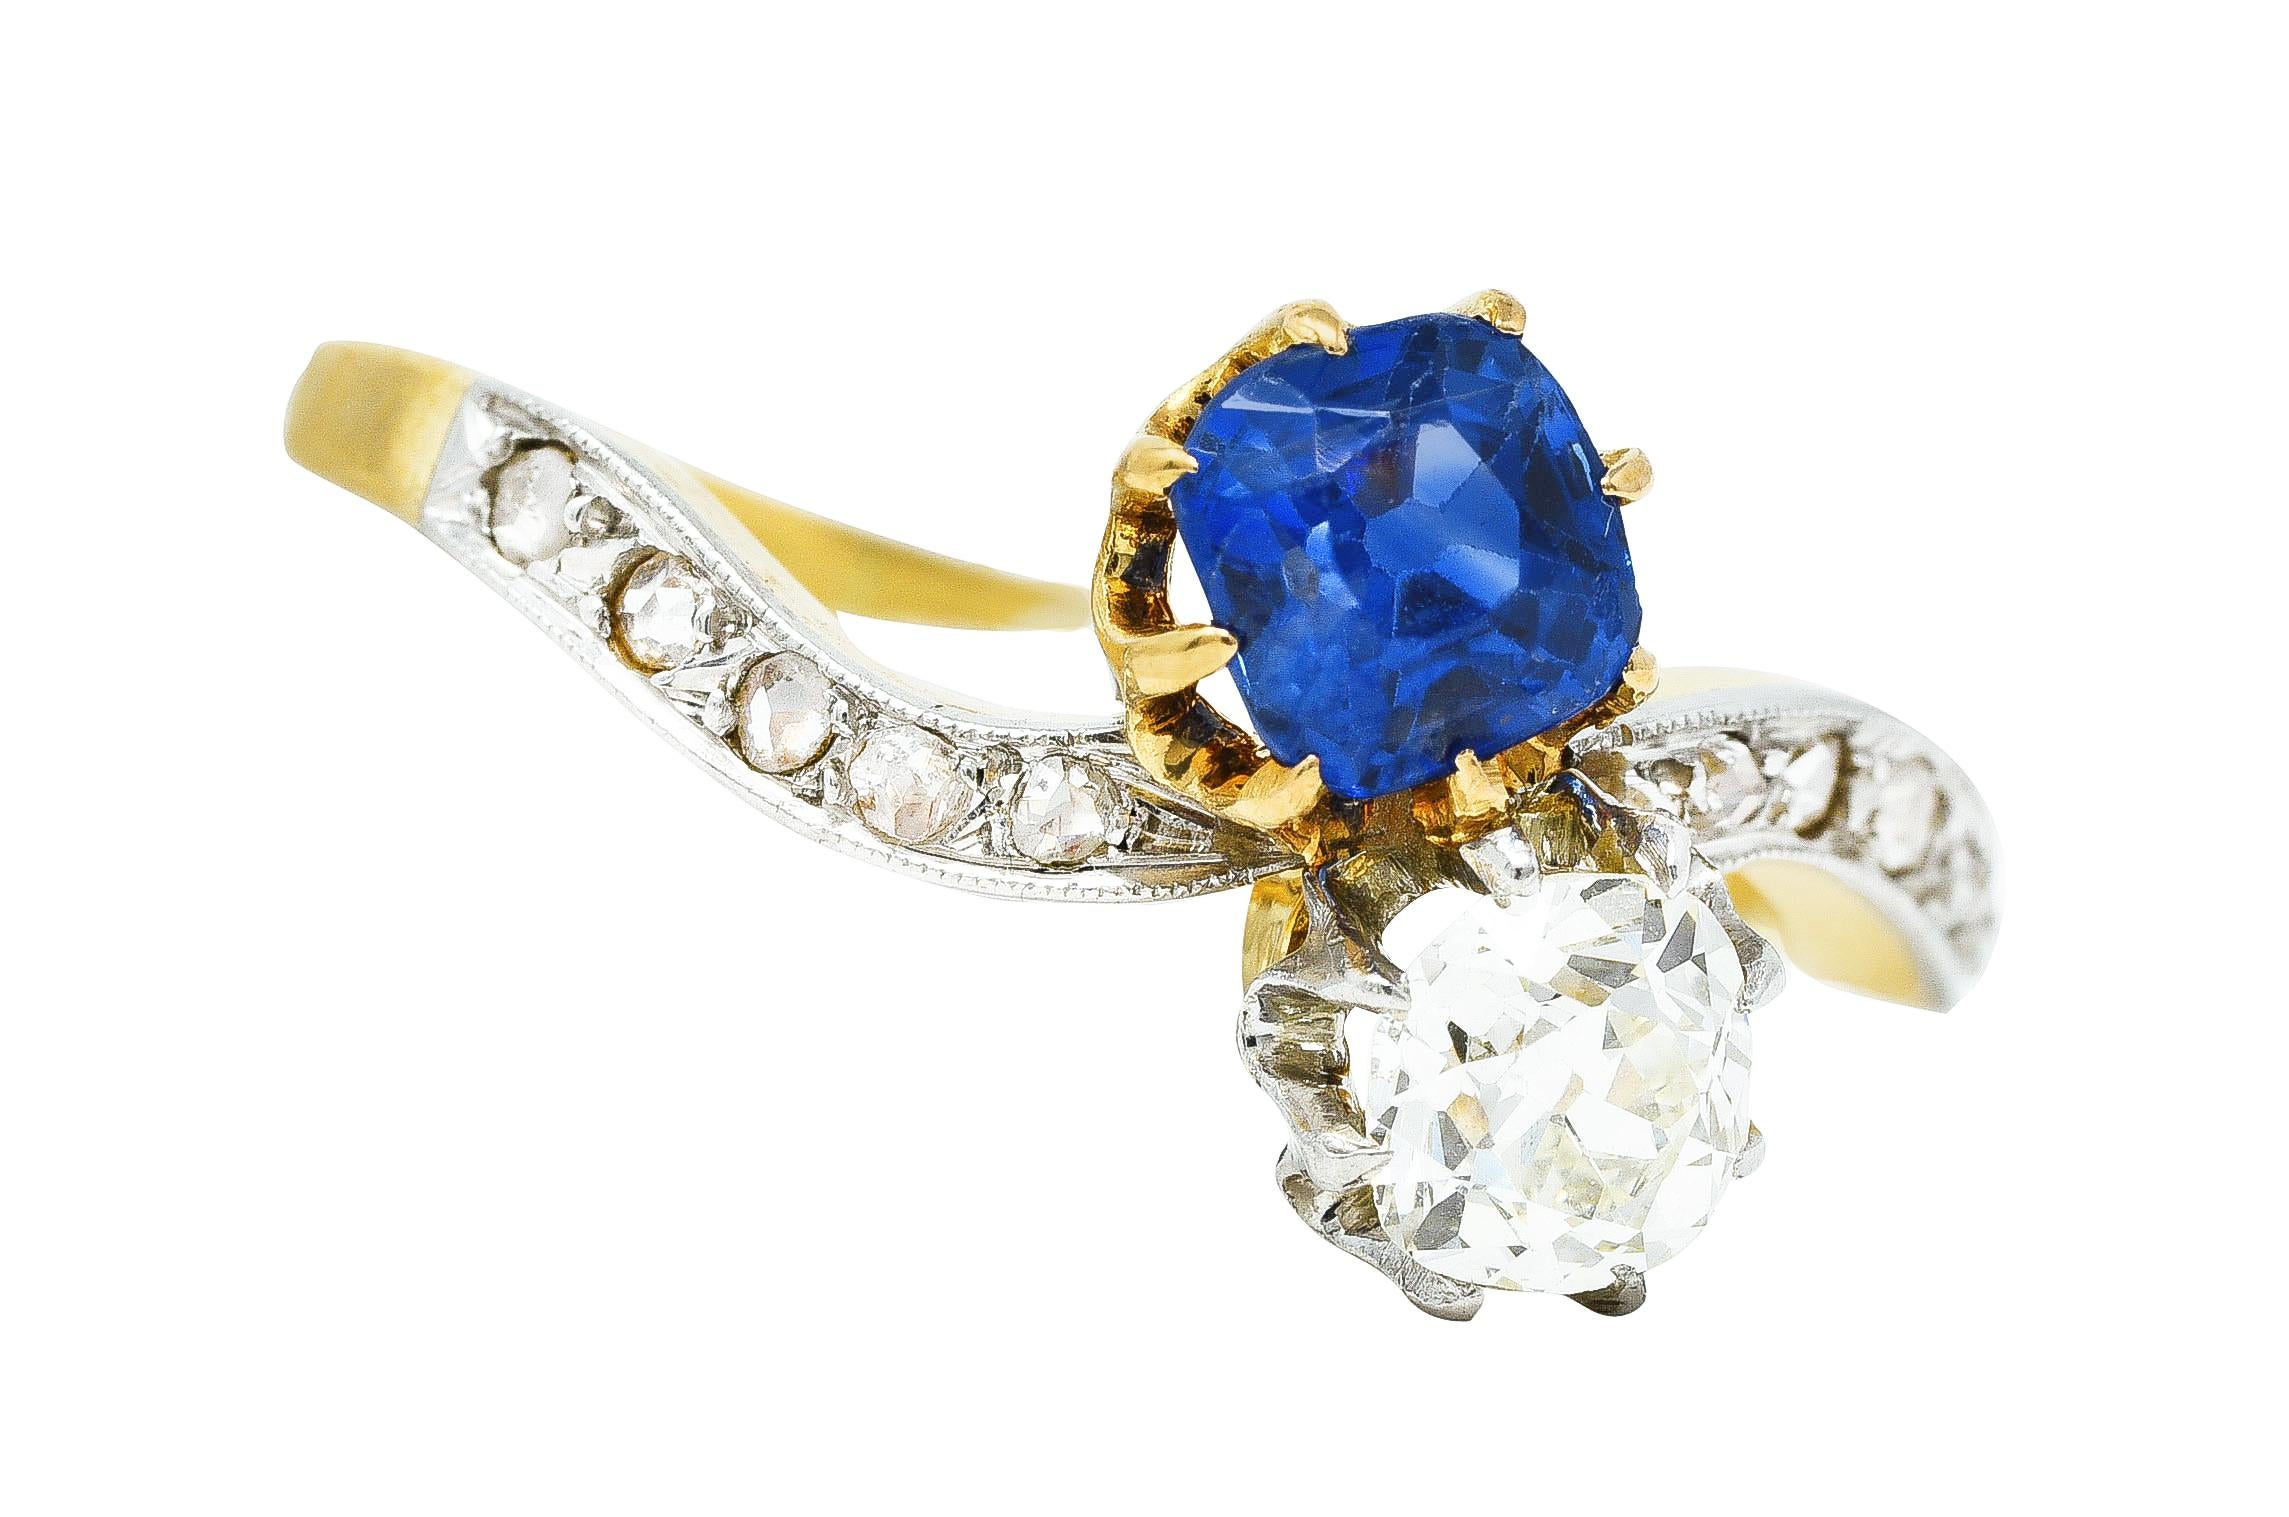 Bypass ring in a double stone Toi et Moi style - French to mean 'You and Me'. Featuring a cushion cut sapphire weighing approximately 0.85 carat. Transparent with vibrant violetish blue color. Coupled with an old mine cut diamond weighing